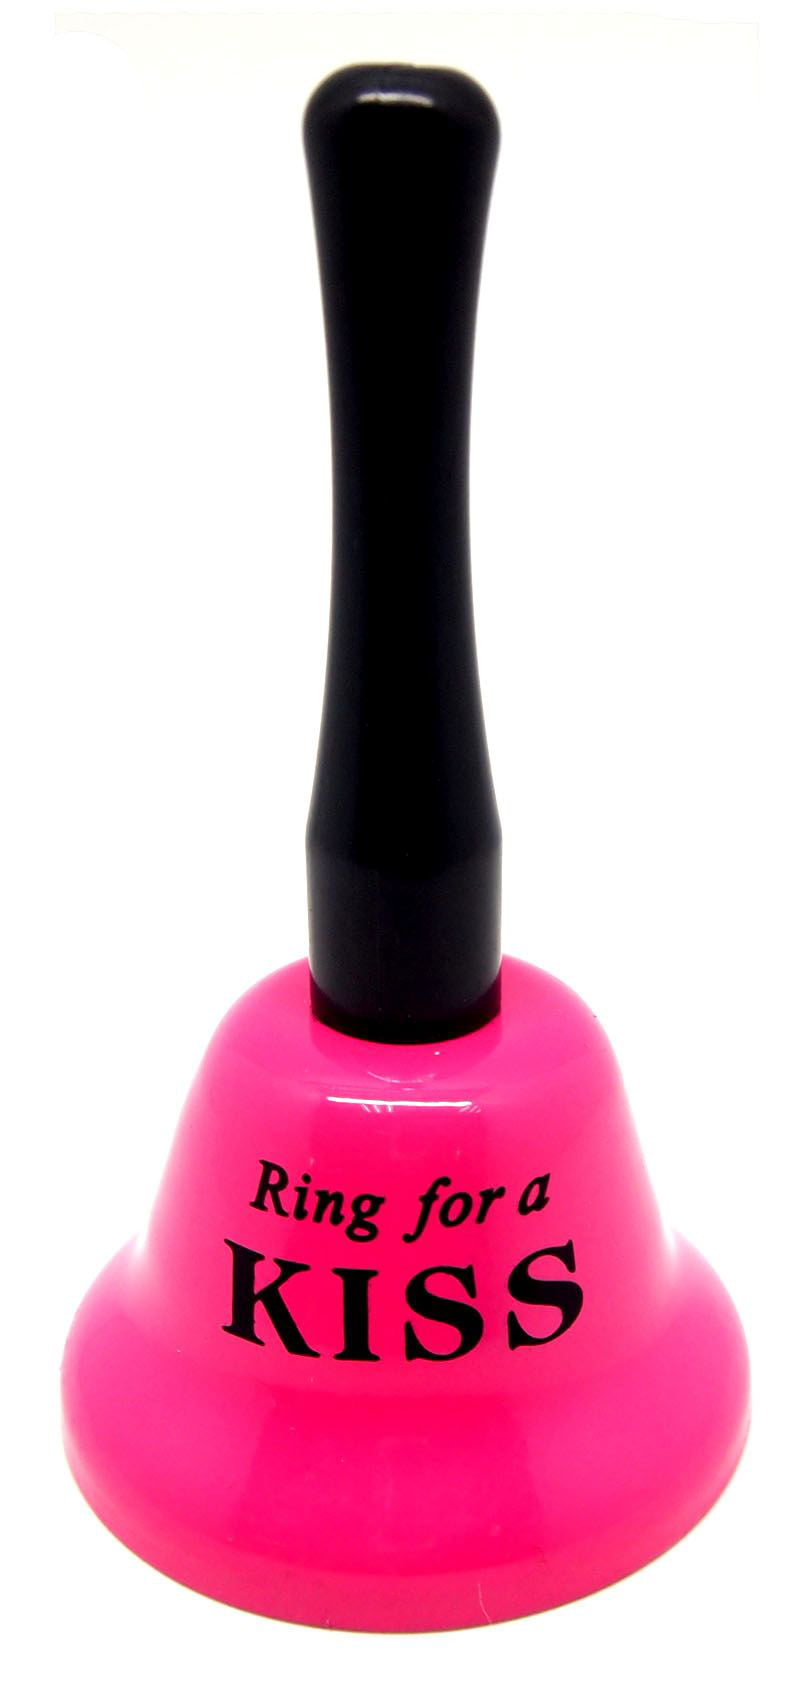 Ring For Kiss Bell with Stick Handle for Cheering at Wedding Events, 5.1  inch Pink Bell with Black Handle